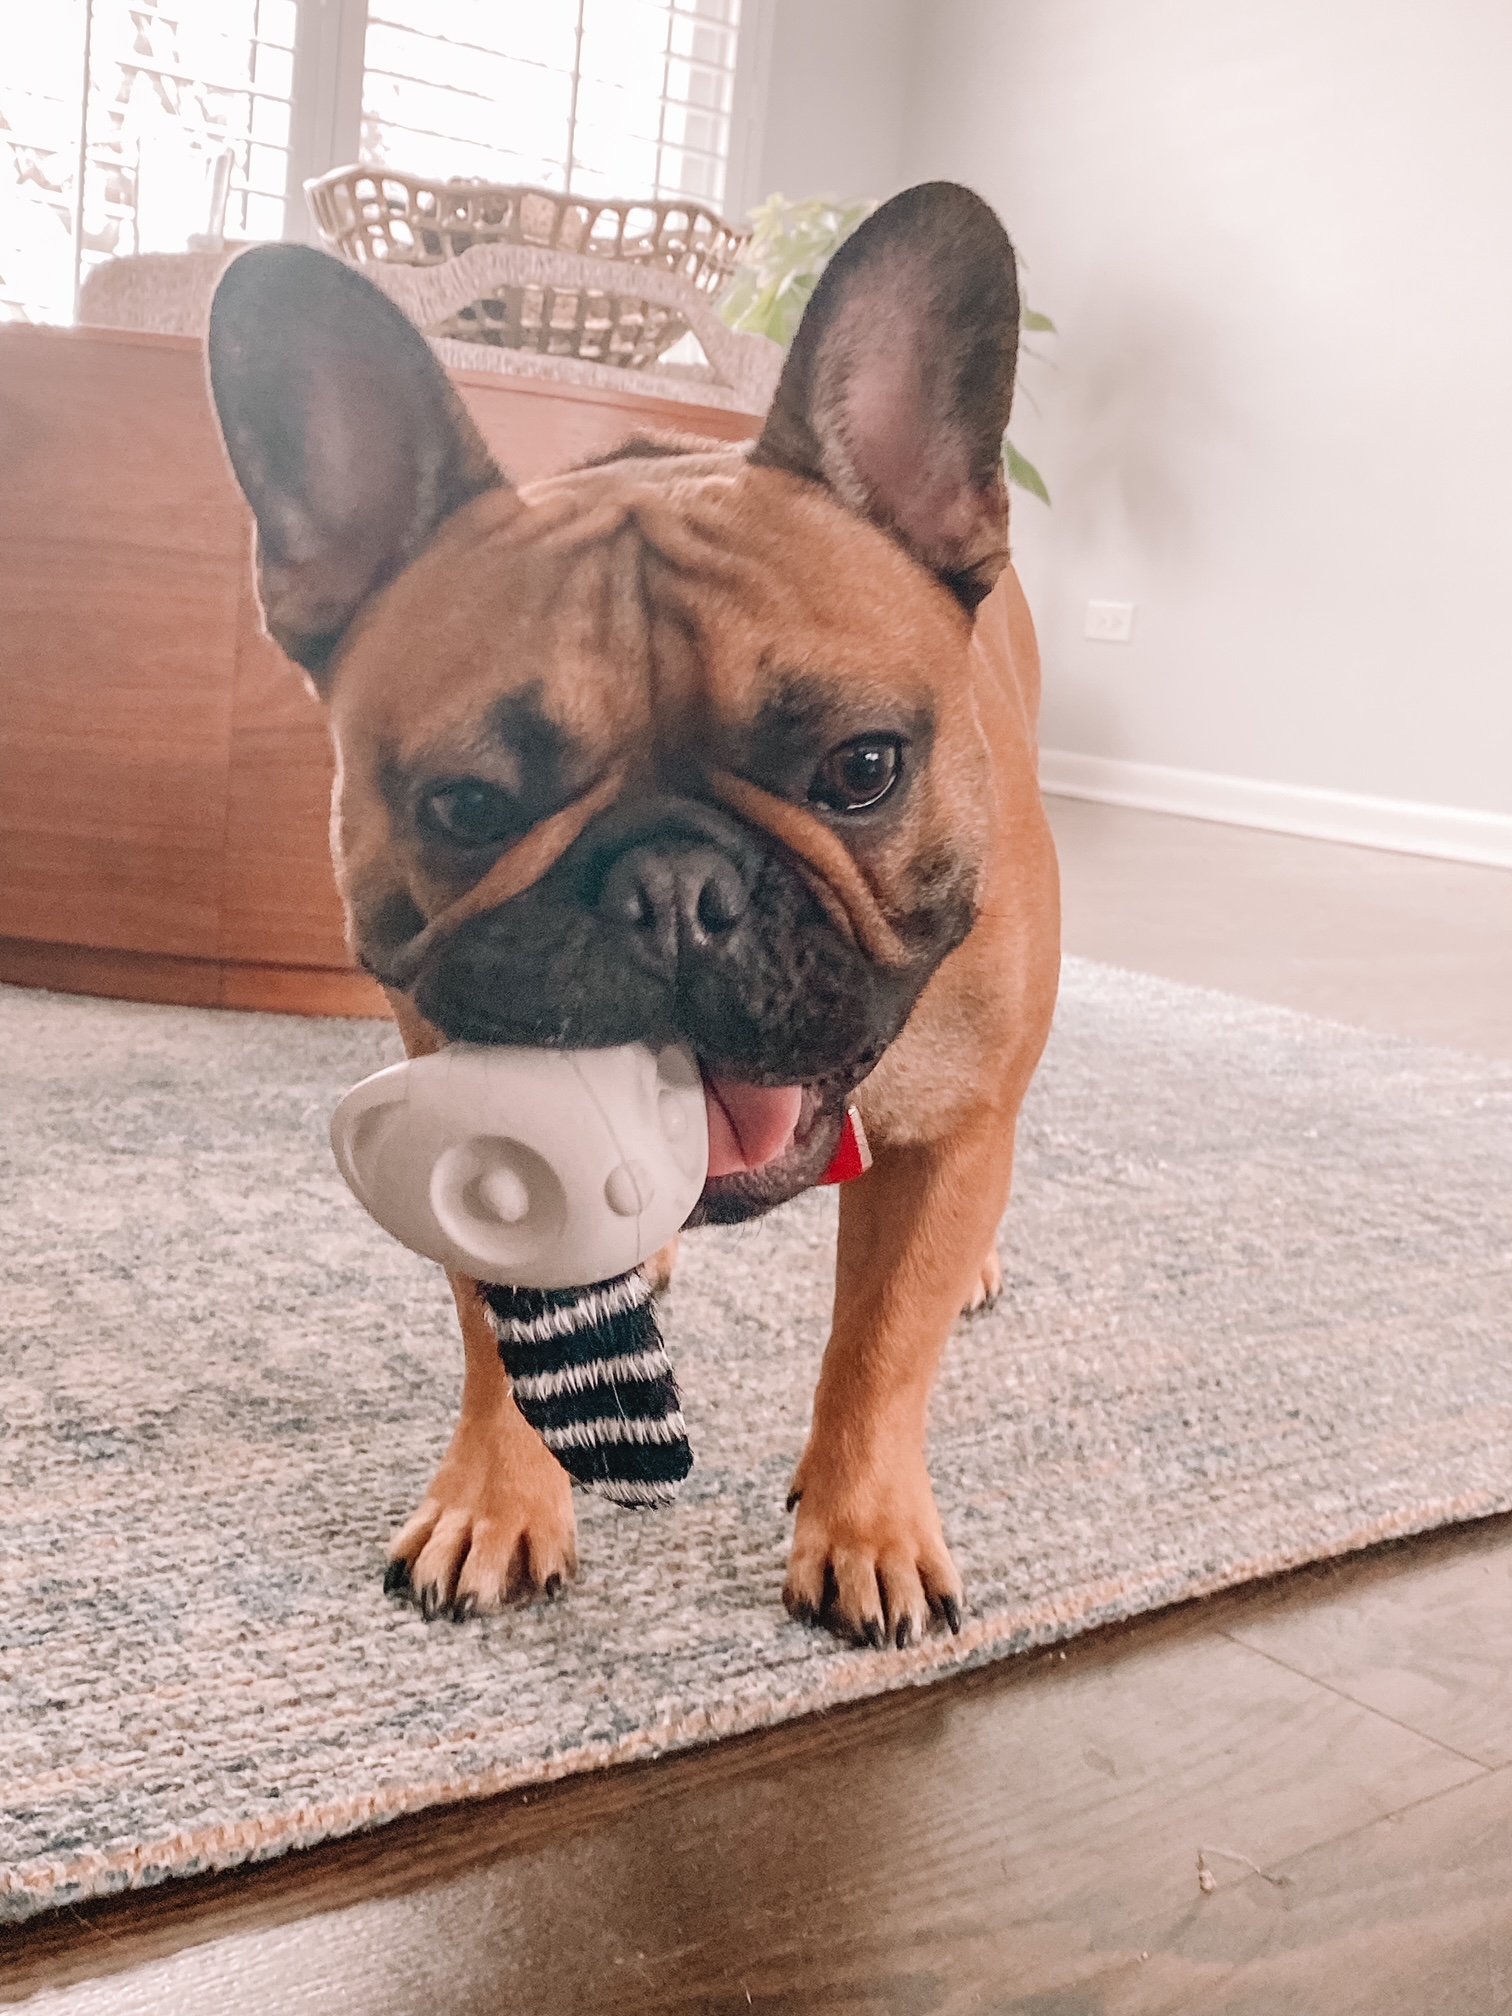 Hank The Bulldog Is Loving Super Chewer. Here’s Why.